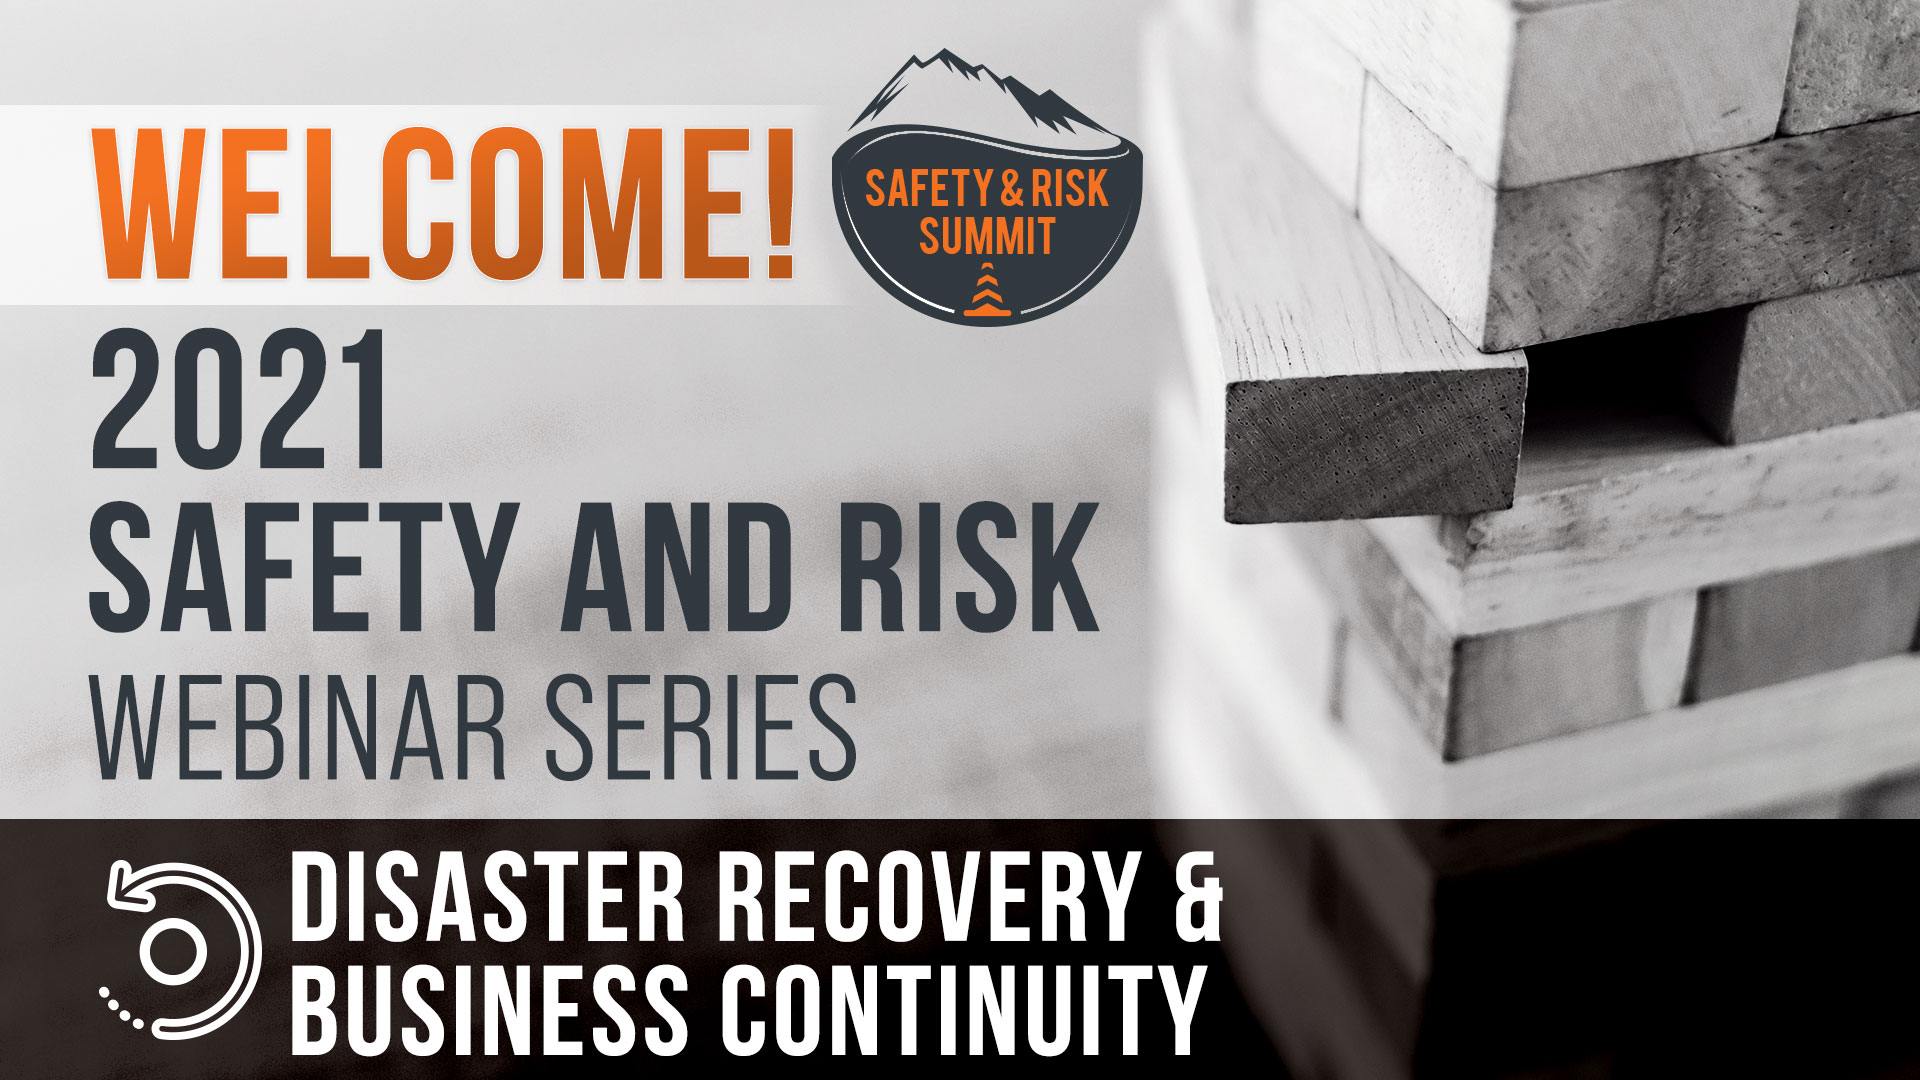 Safety & Risk Summit - Disaster Recovery & Business Continuity